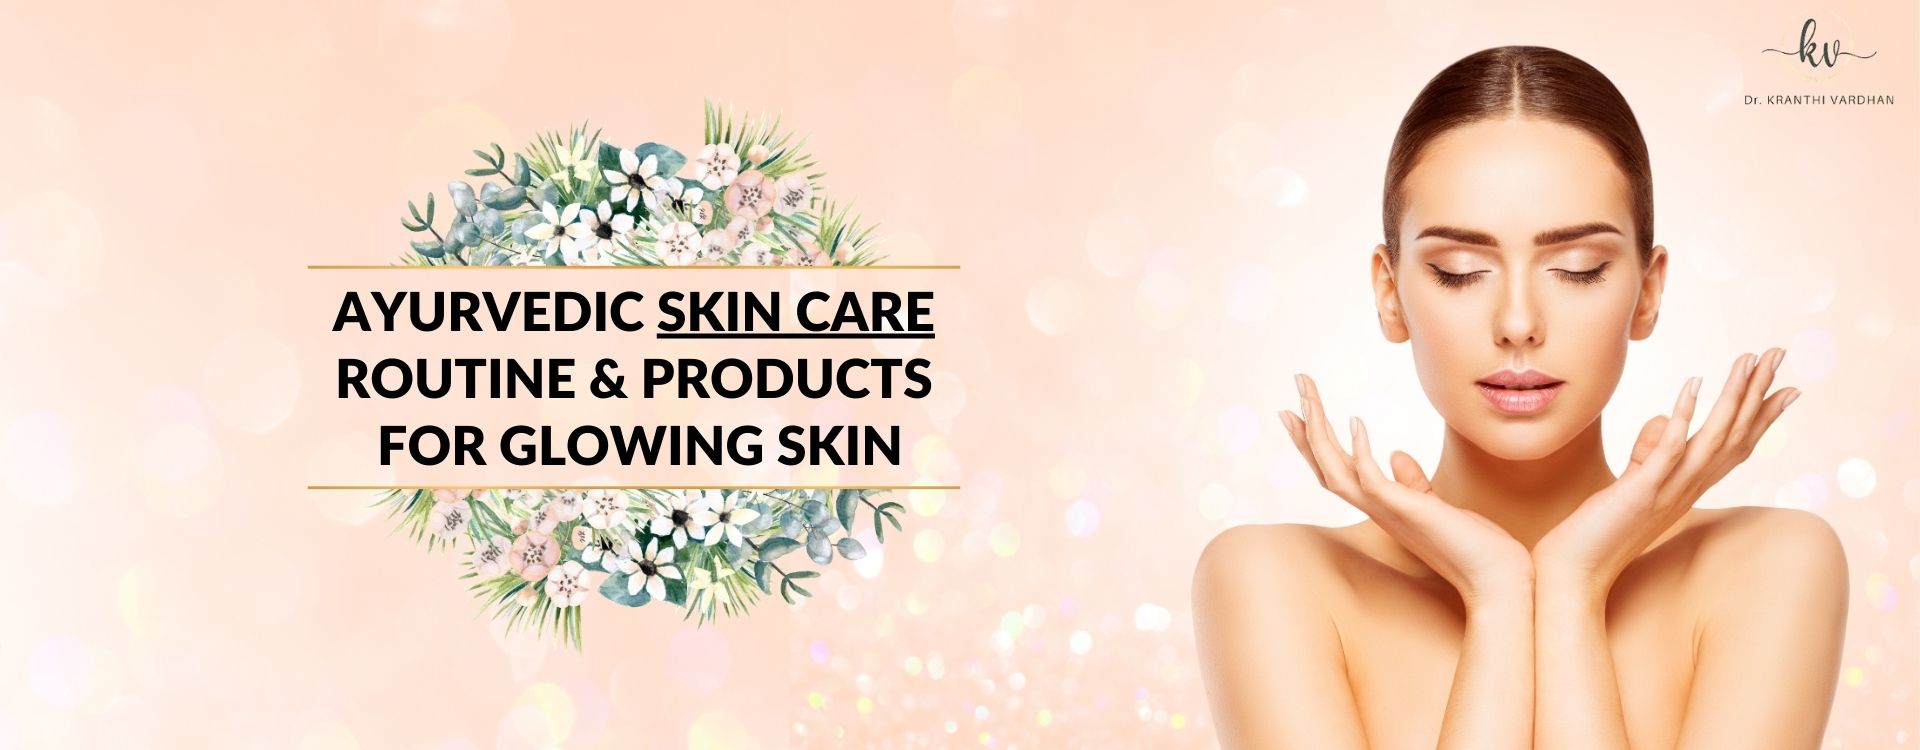 Ayurvedic skin care routine & products for glowing skin